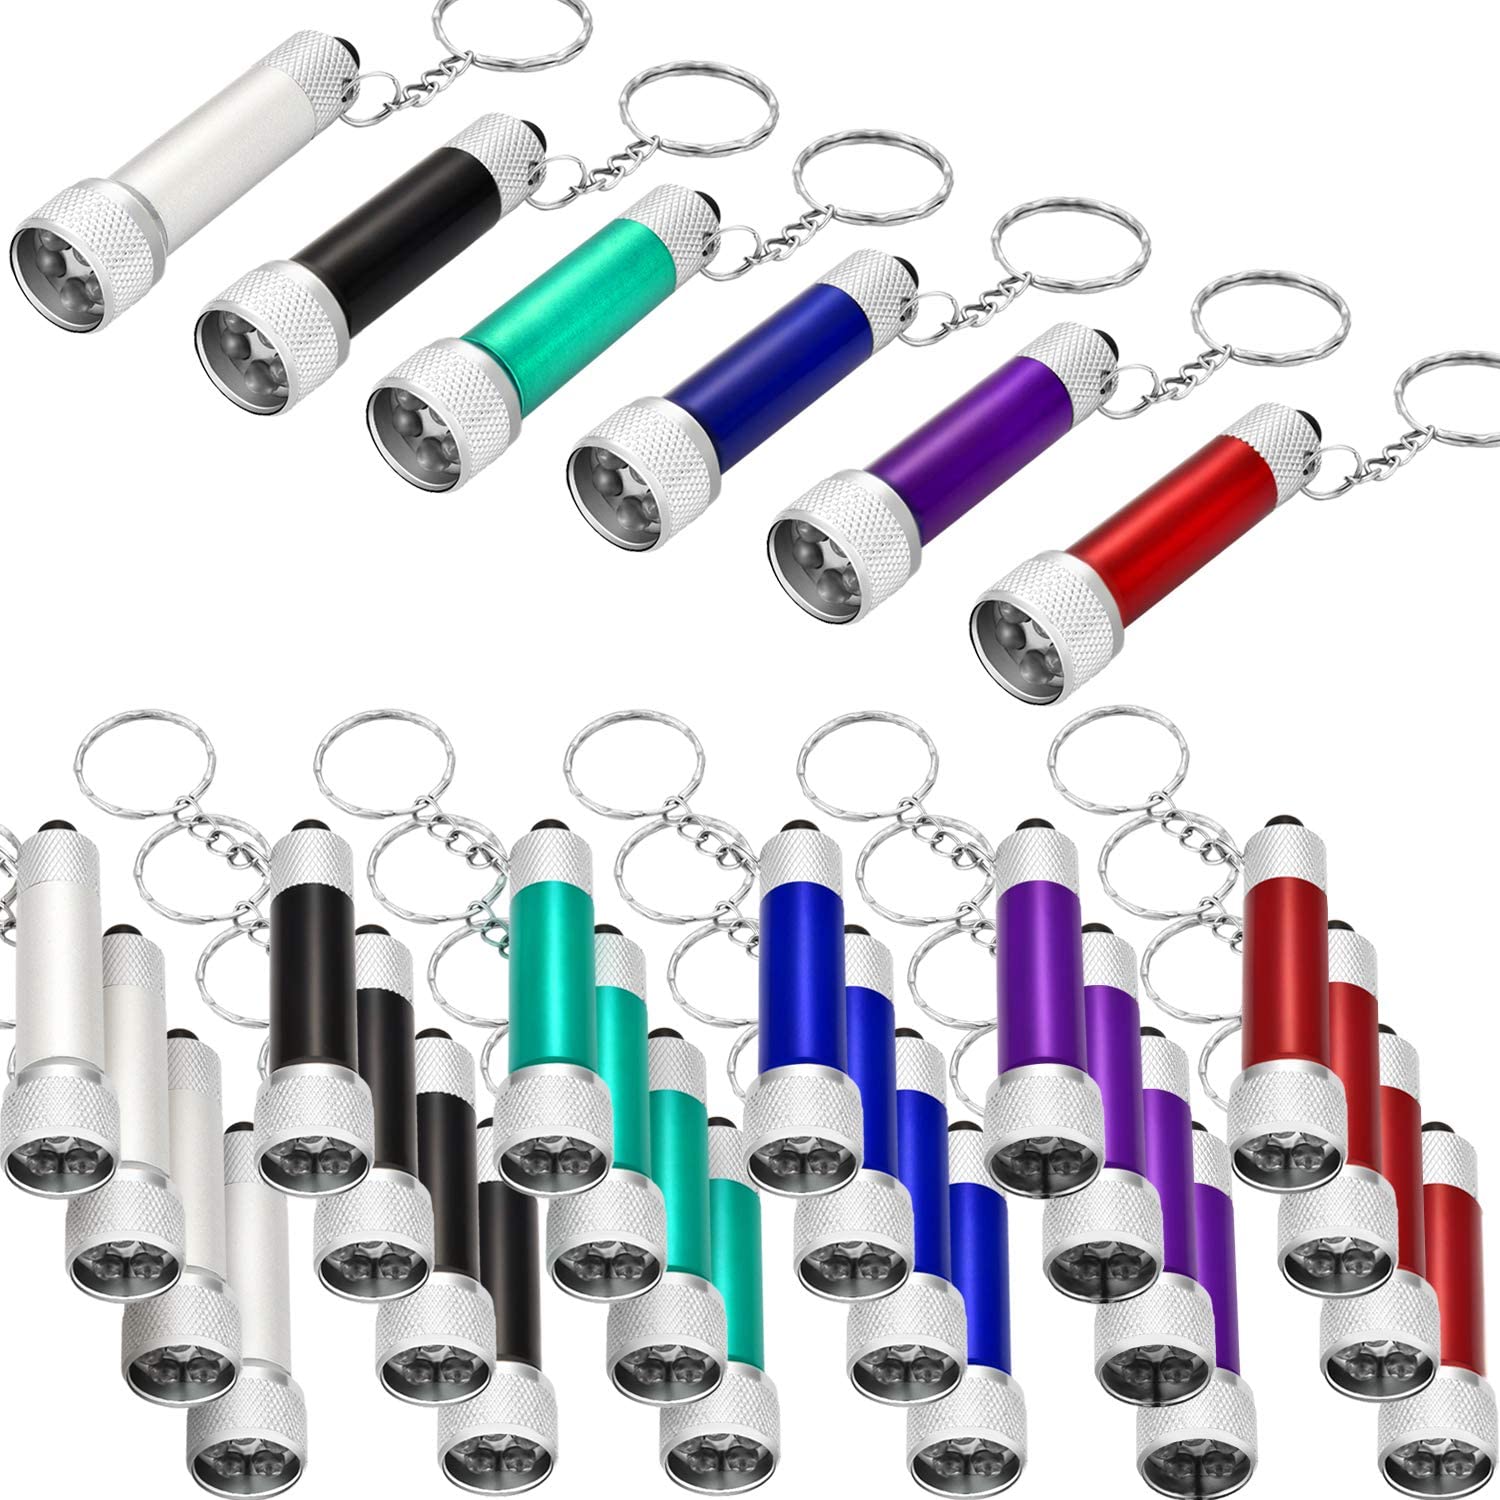 30 Pieces Mini Led Flashlight Keychain Portable 5 Bulb LED Flashlight for Camping Party Favors